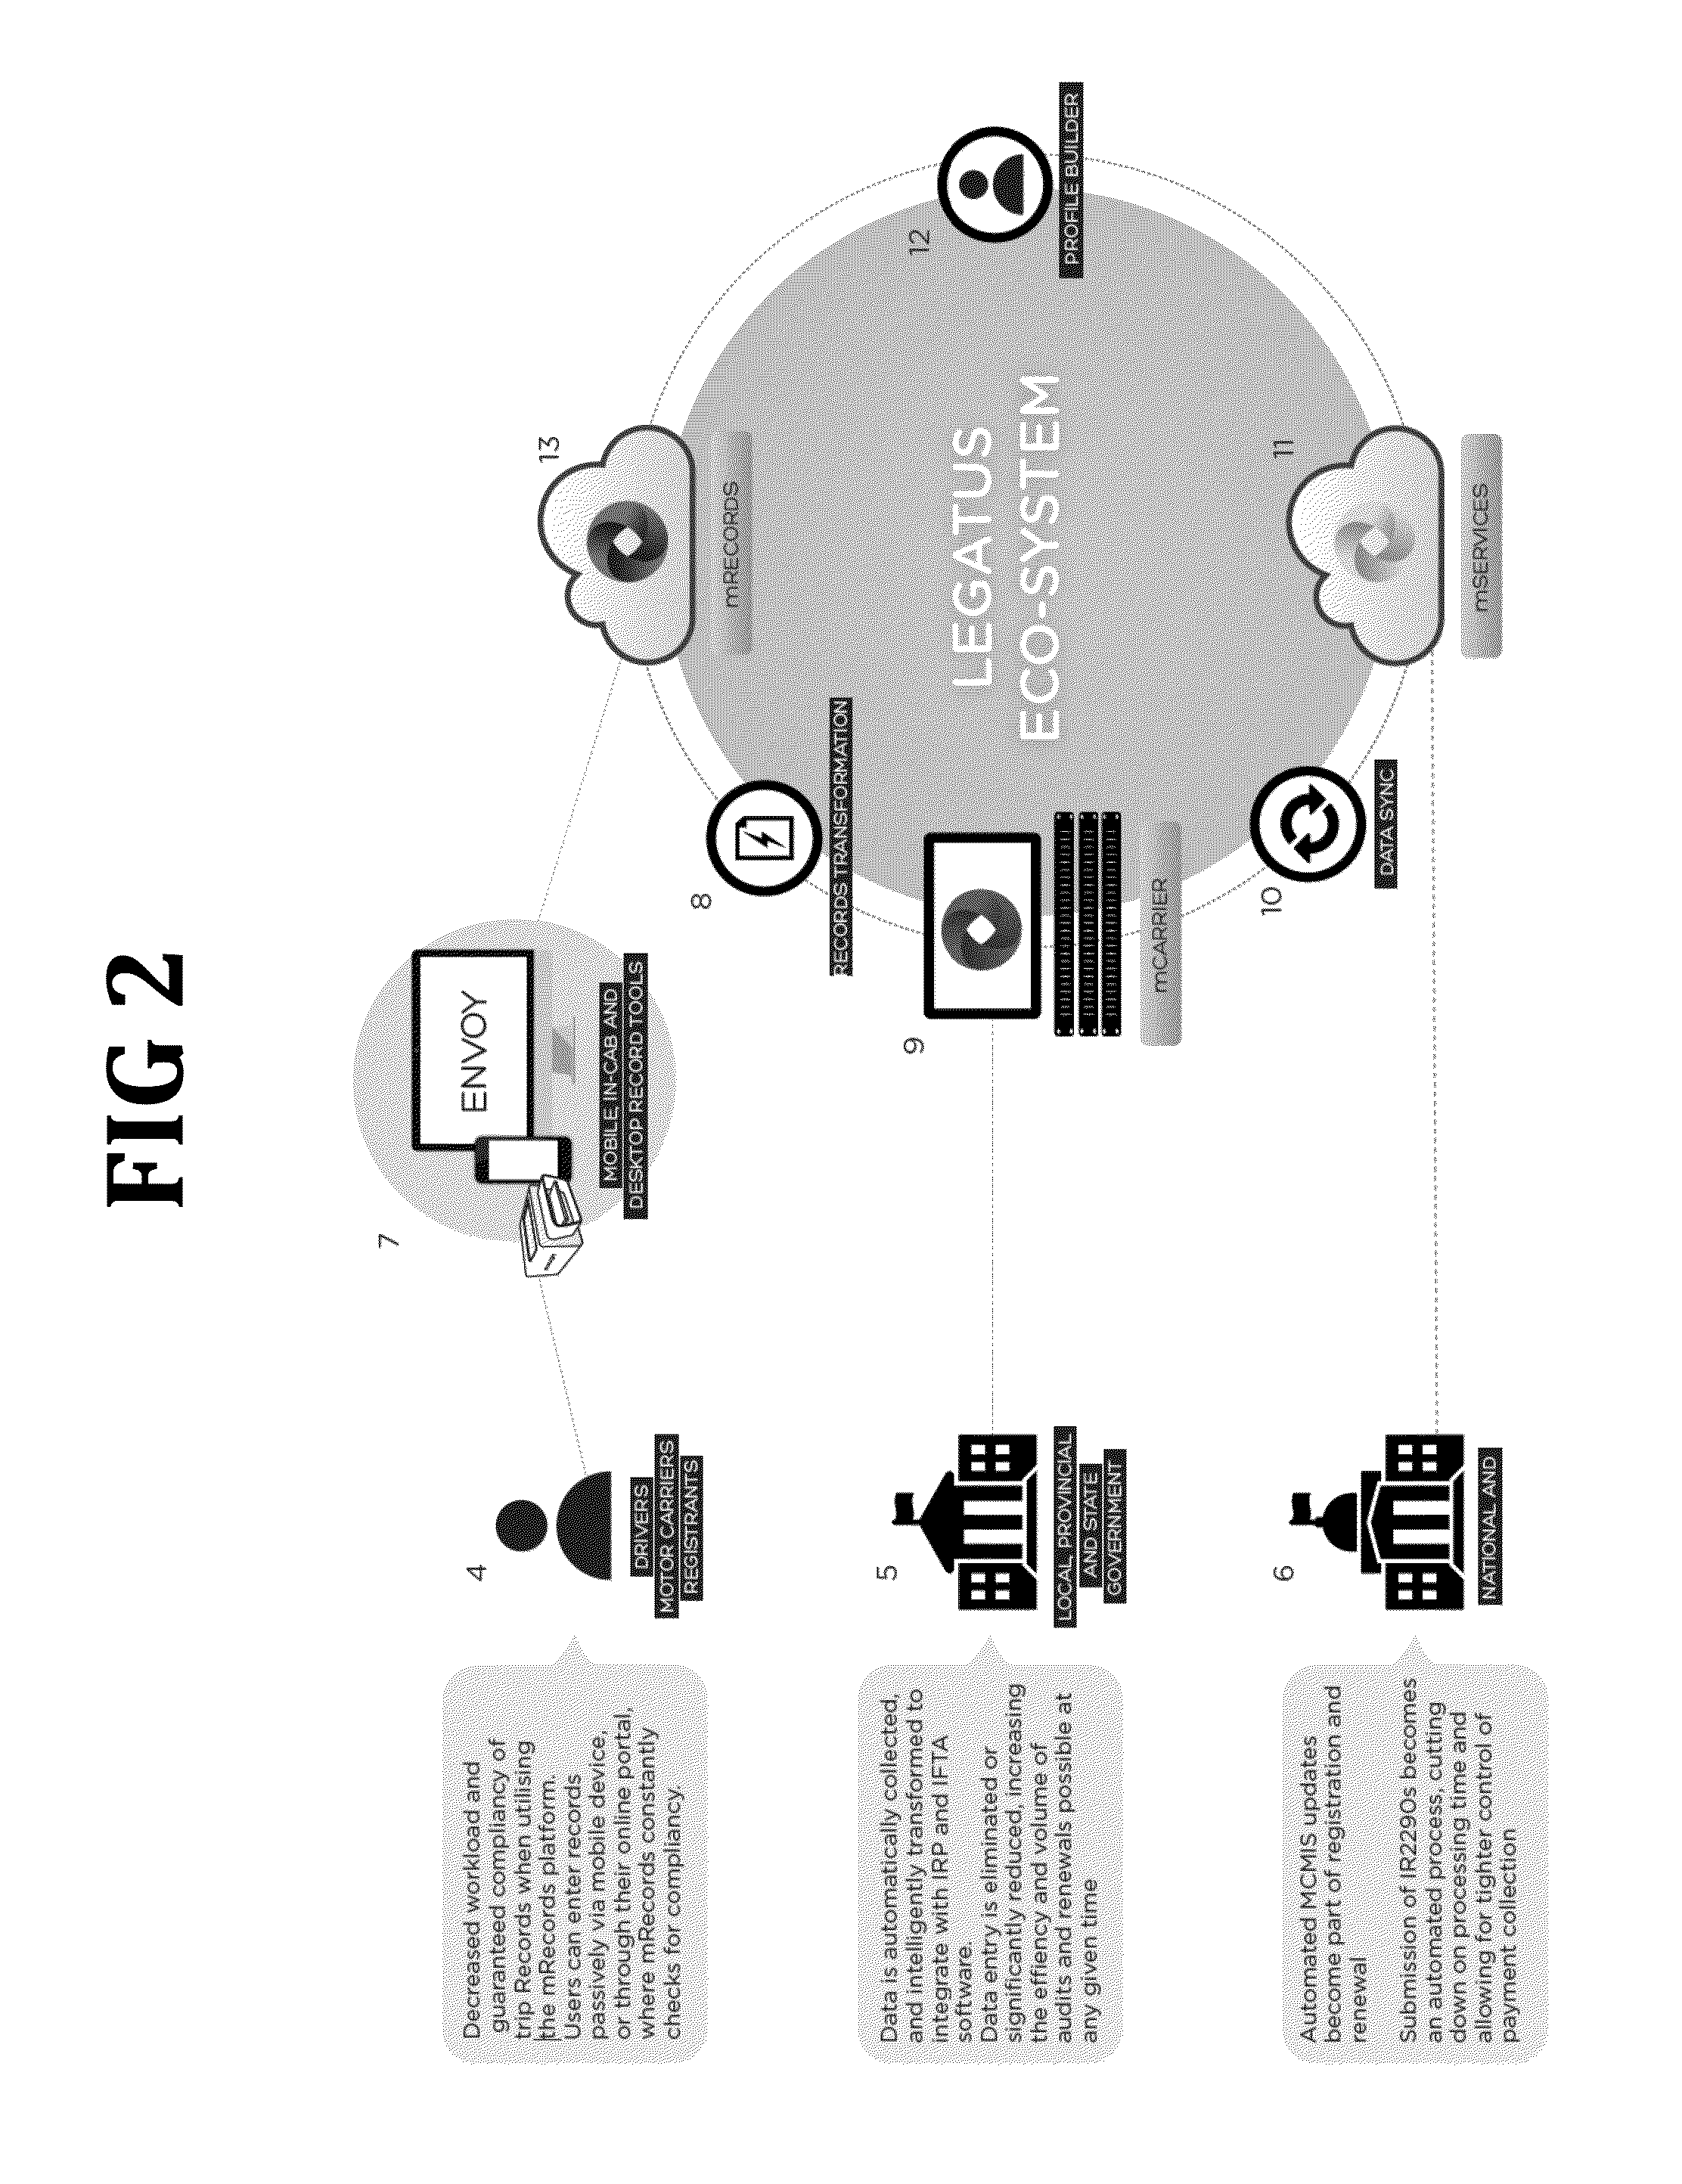 Method and apparatus for preparing, storing and recording compliant records for motor carriers, registrants, and governmental organizations